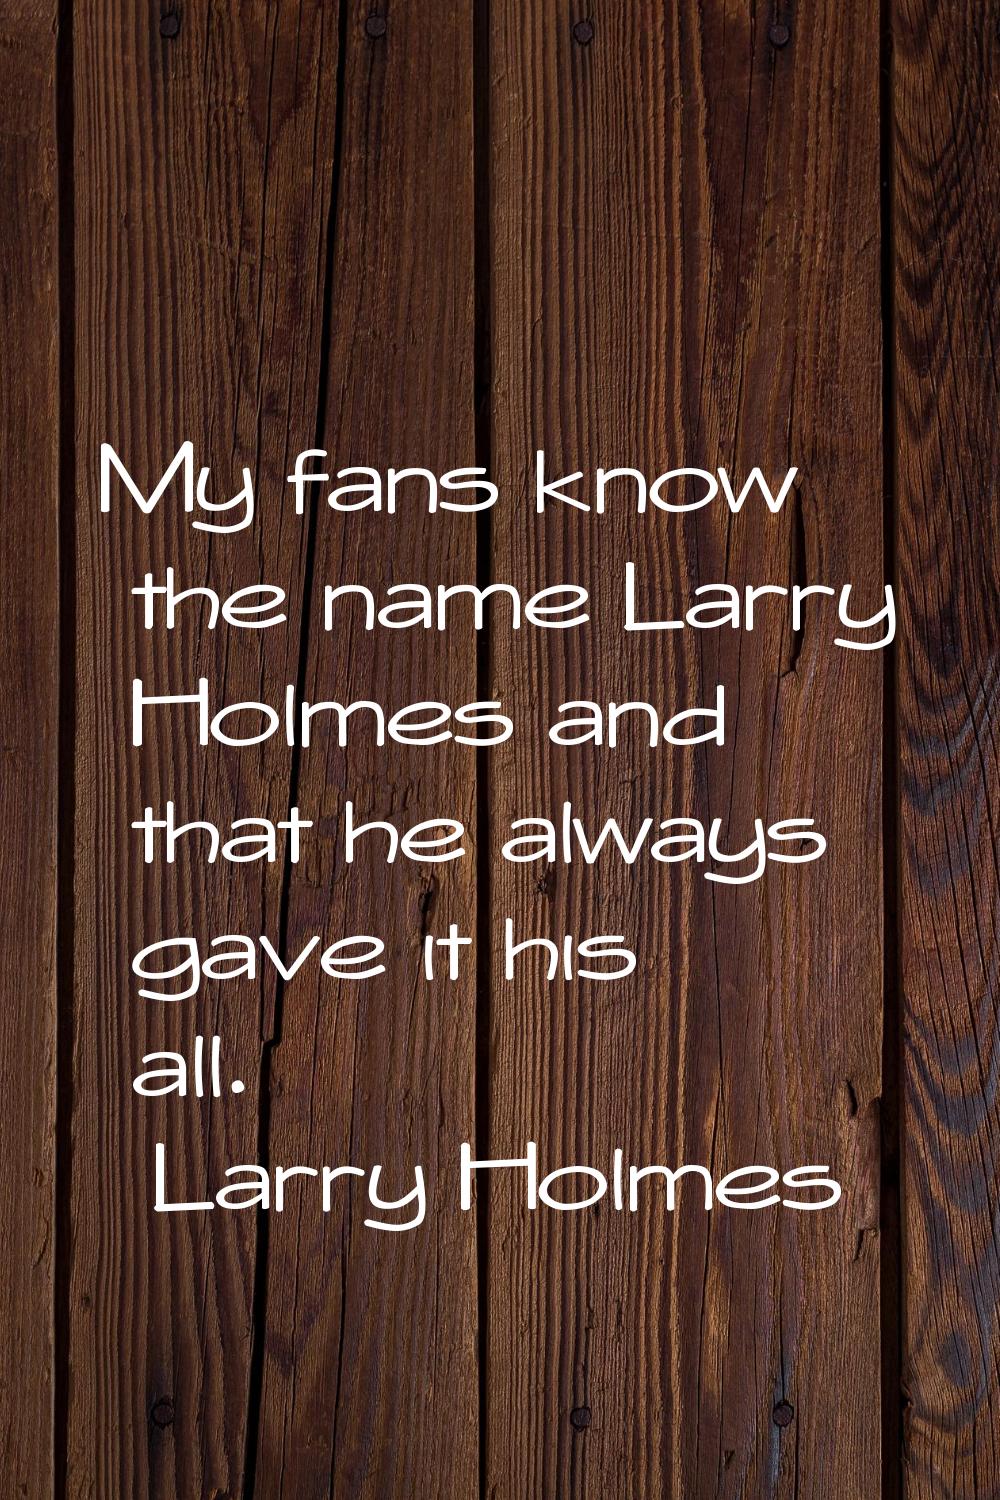 My fans know the name Larry Holmes and that he always gave it his all.